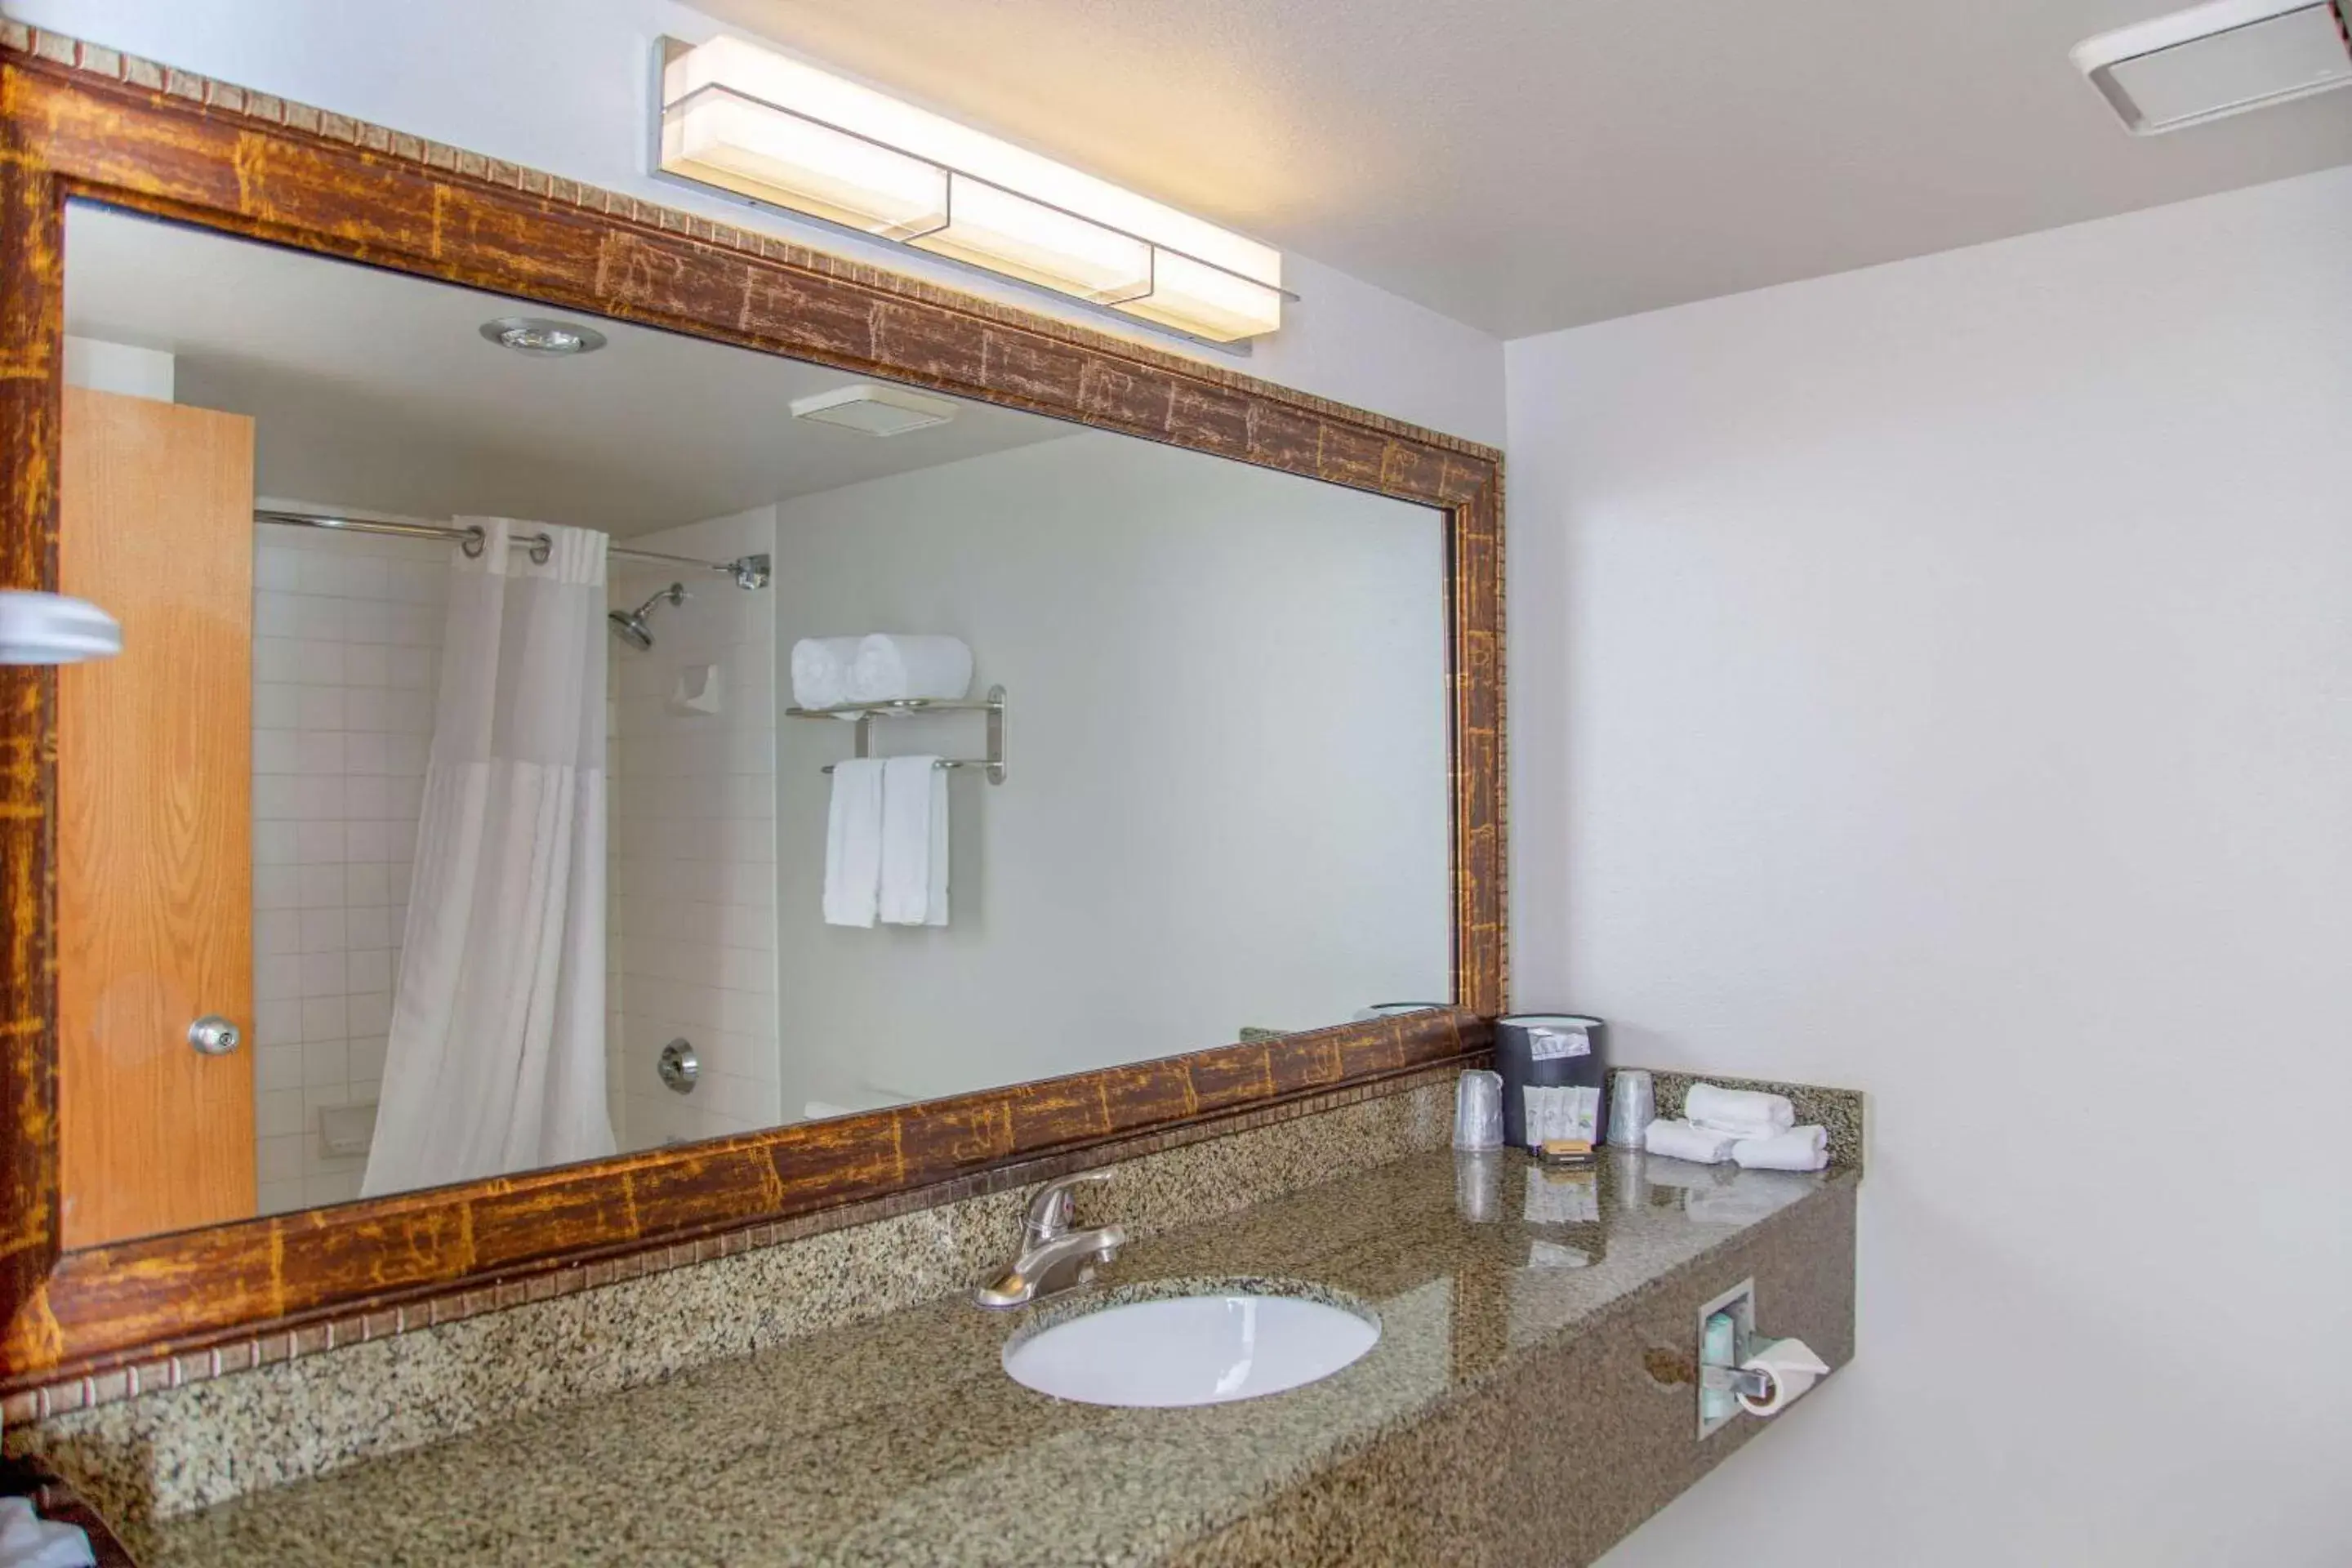 Bathroom in Hells Canyon Grand Hotel, an Ascend Hotel Collection Member